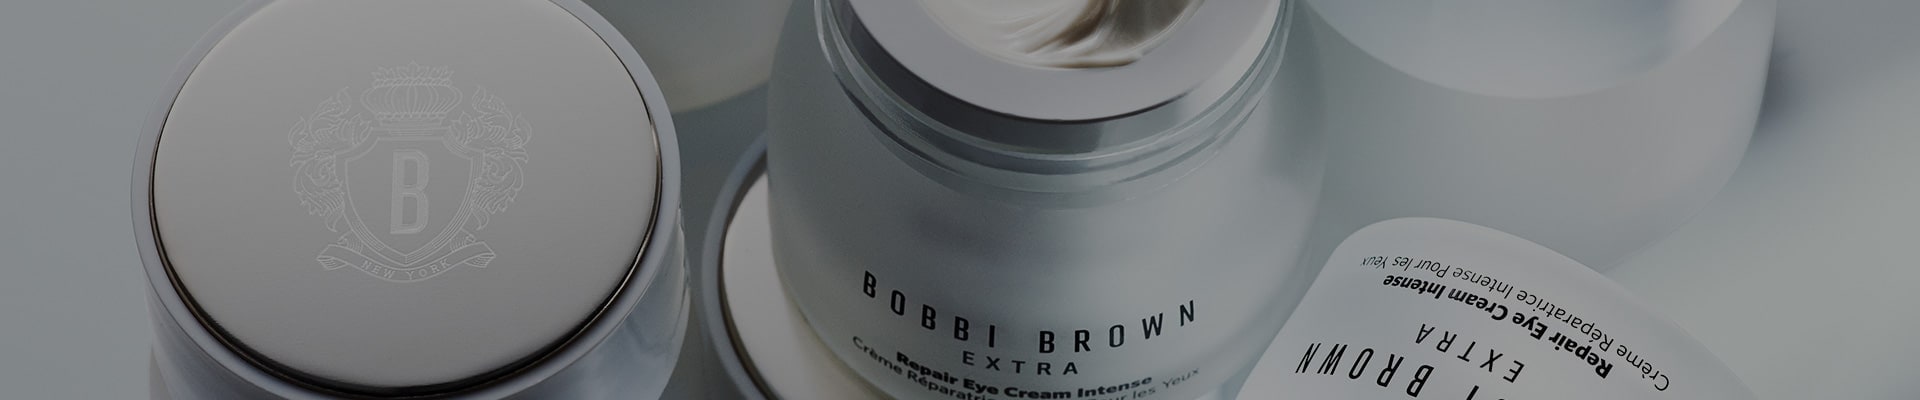 Bobbi Brown Extra Skincare Products shot from above with dramatic lighting